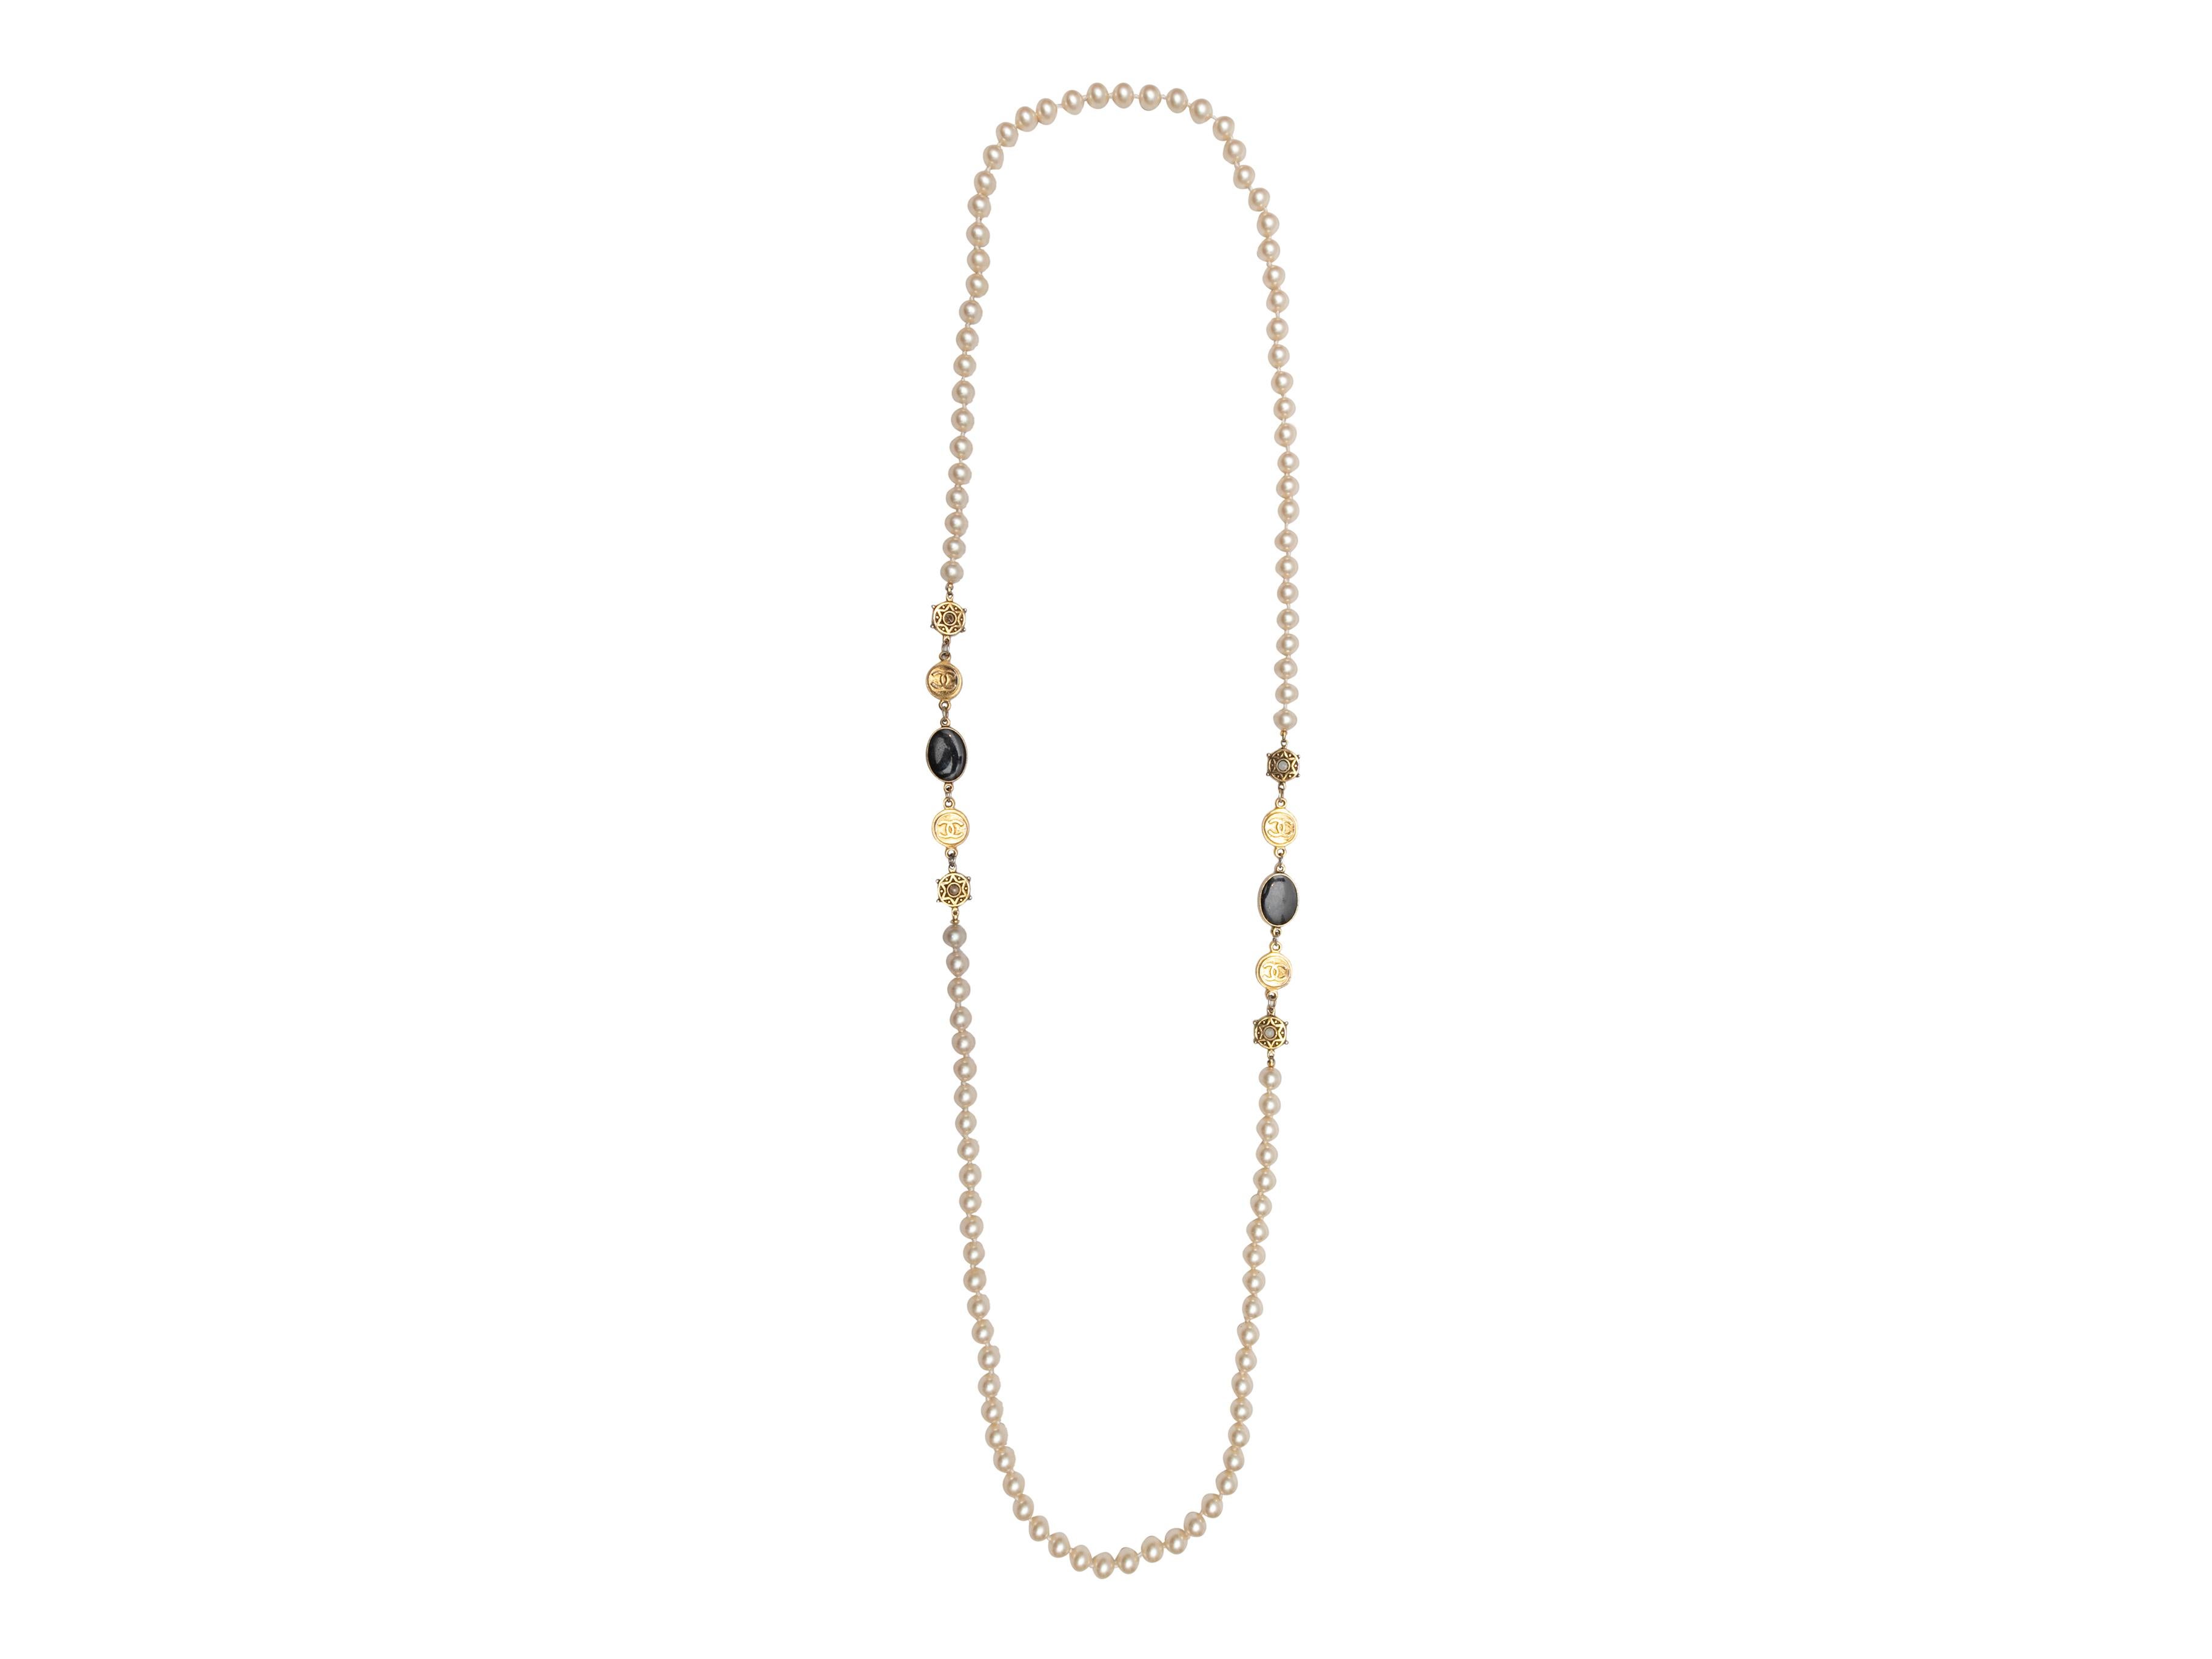 Gold-tone metal and faux pearl long strand necklace by Chanel. 0.5